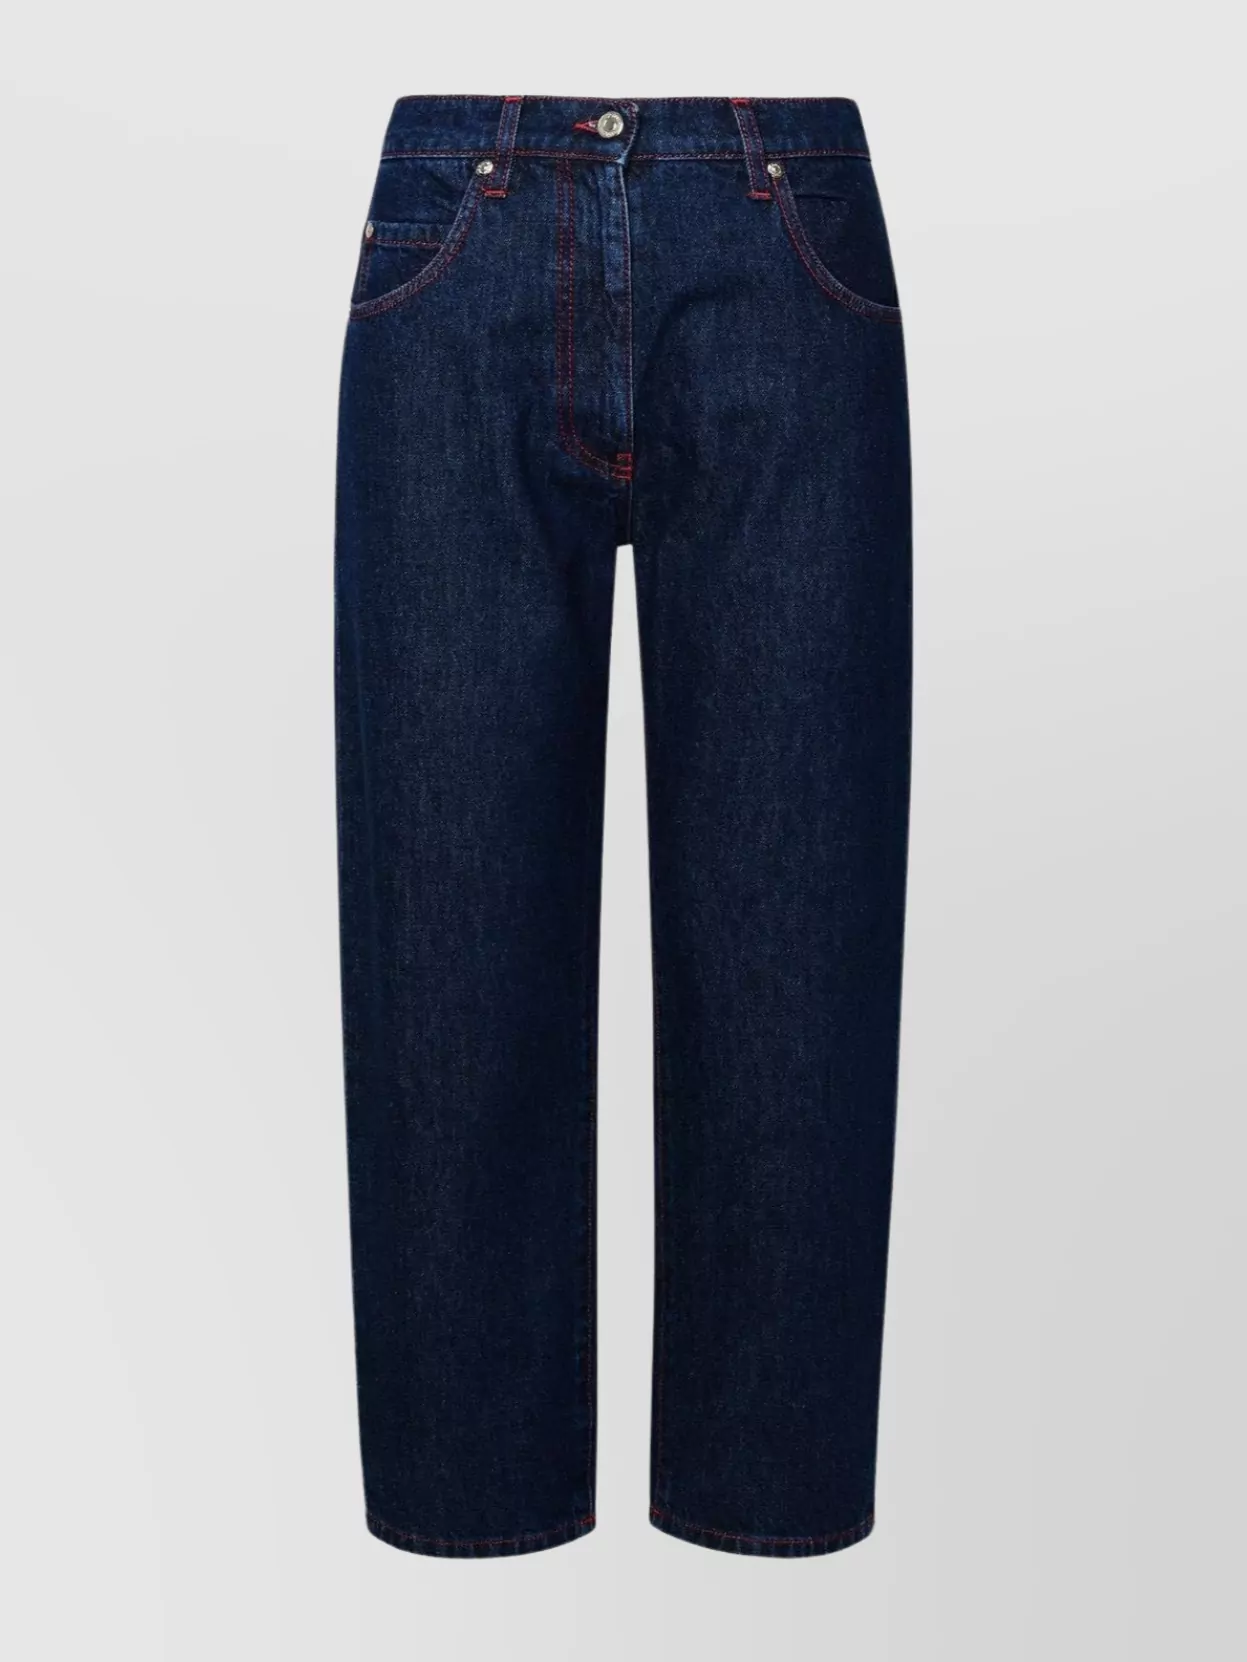 Msgm Denim Trousers With Belt Loops And Contrast Stitching In Blue